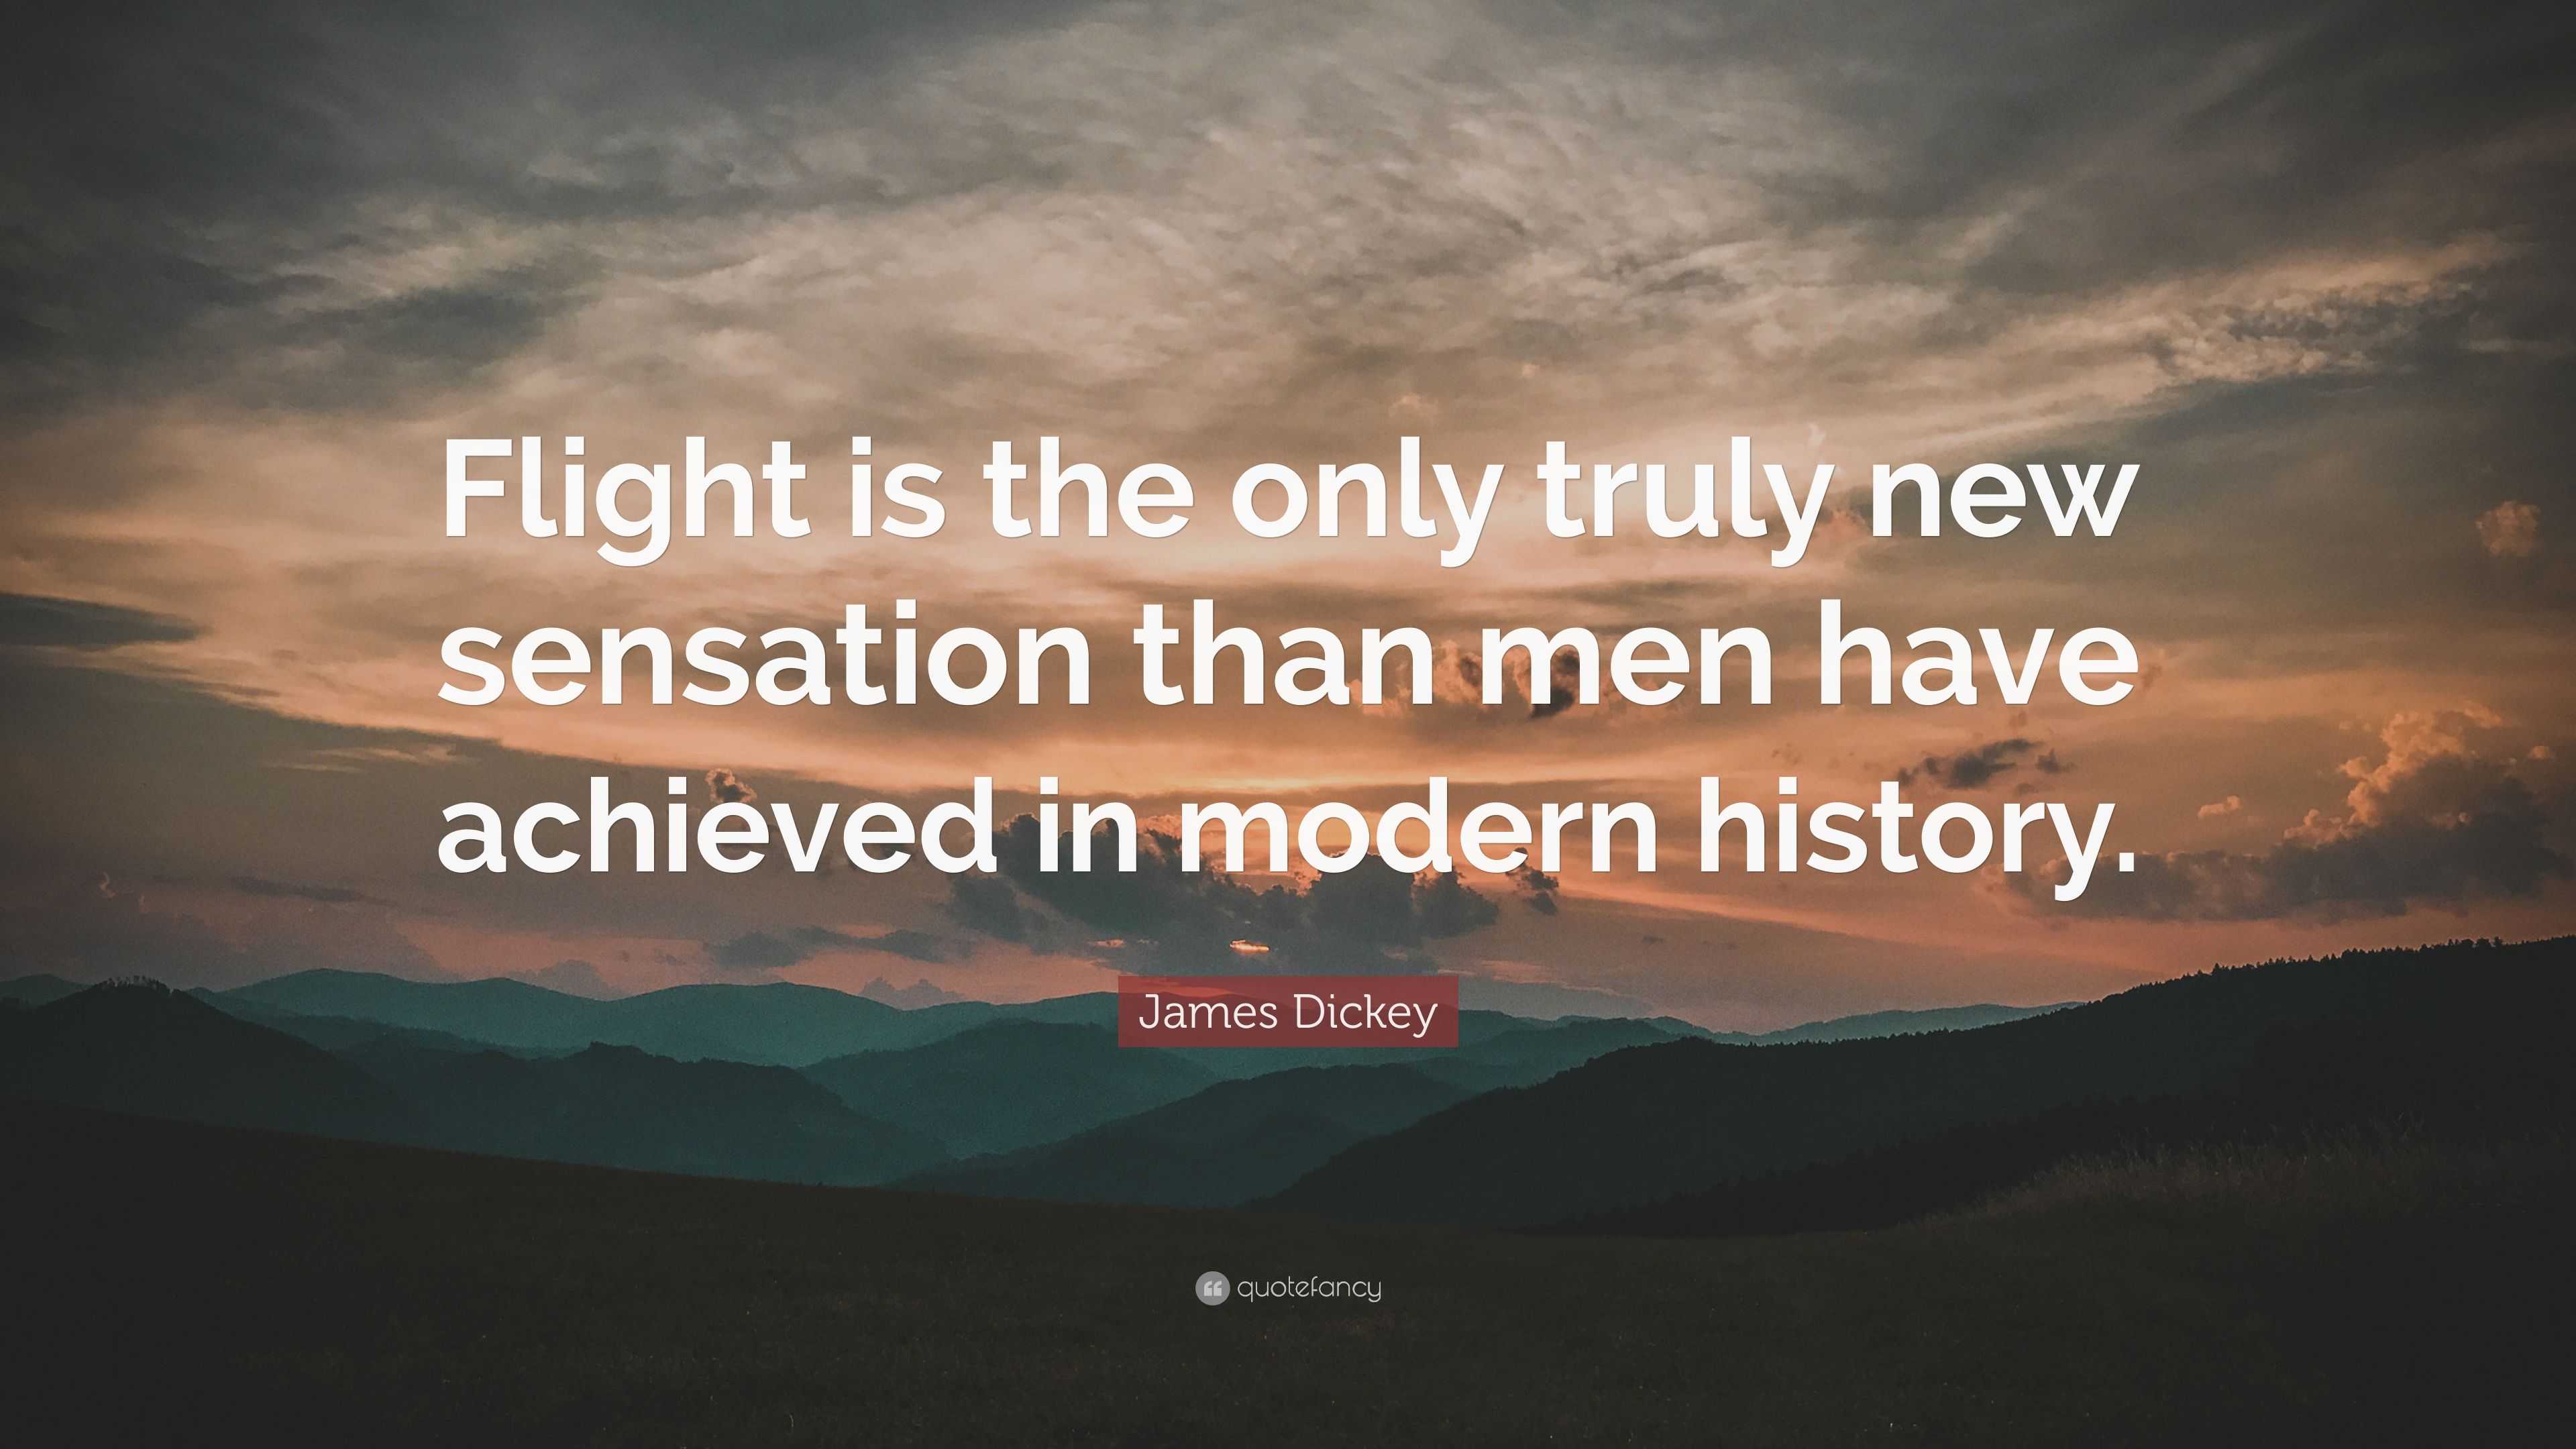 James Dickey Quote: “Flight is the only truly new sensation than men have  achieved in modern